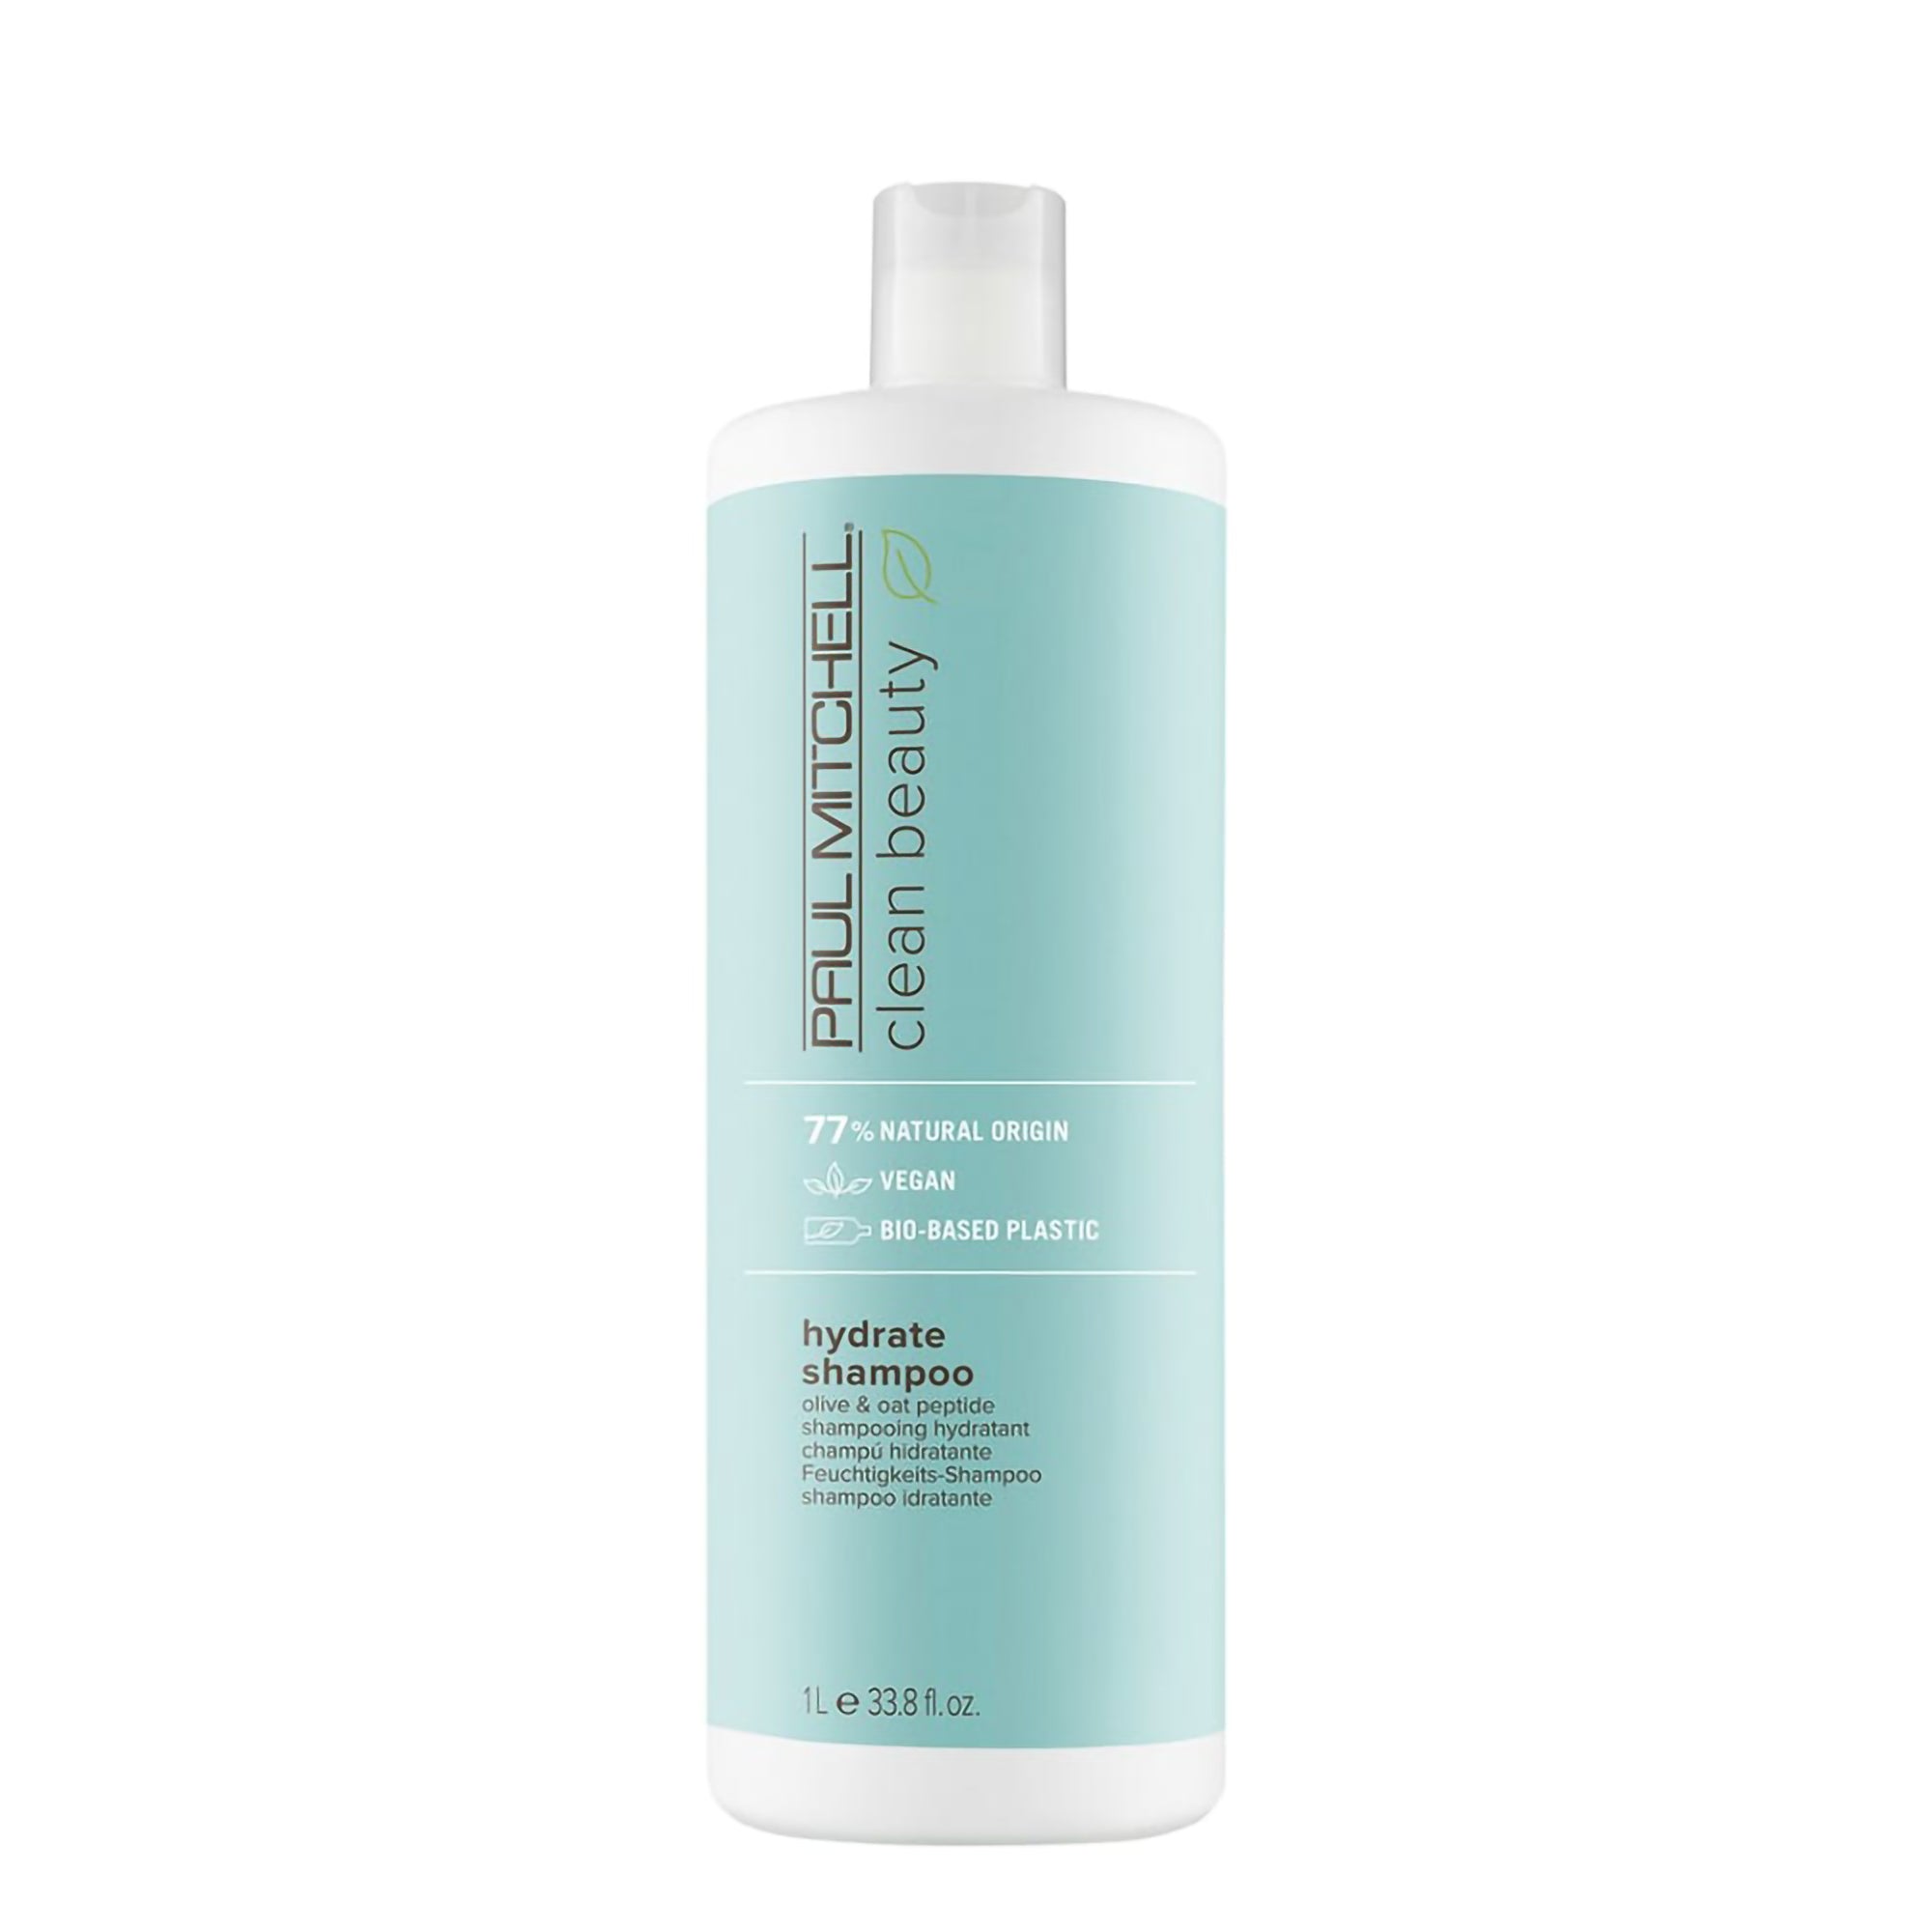 Paul Mitchell Clean Beauty Hydrate Shampoo and Conditioner Liter Duo / 33OZ